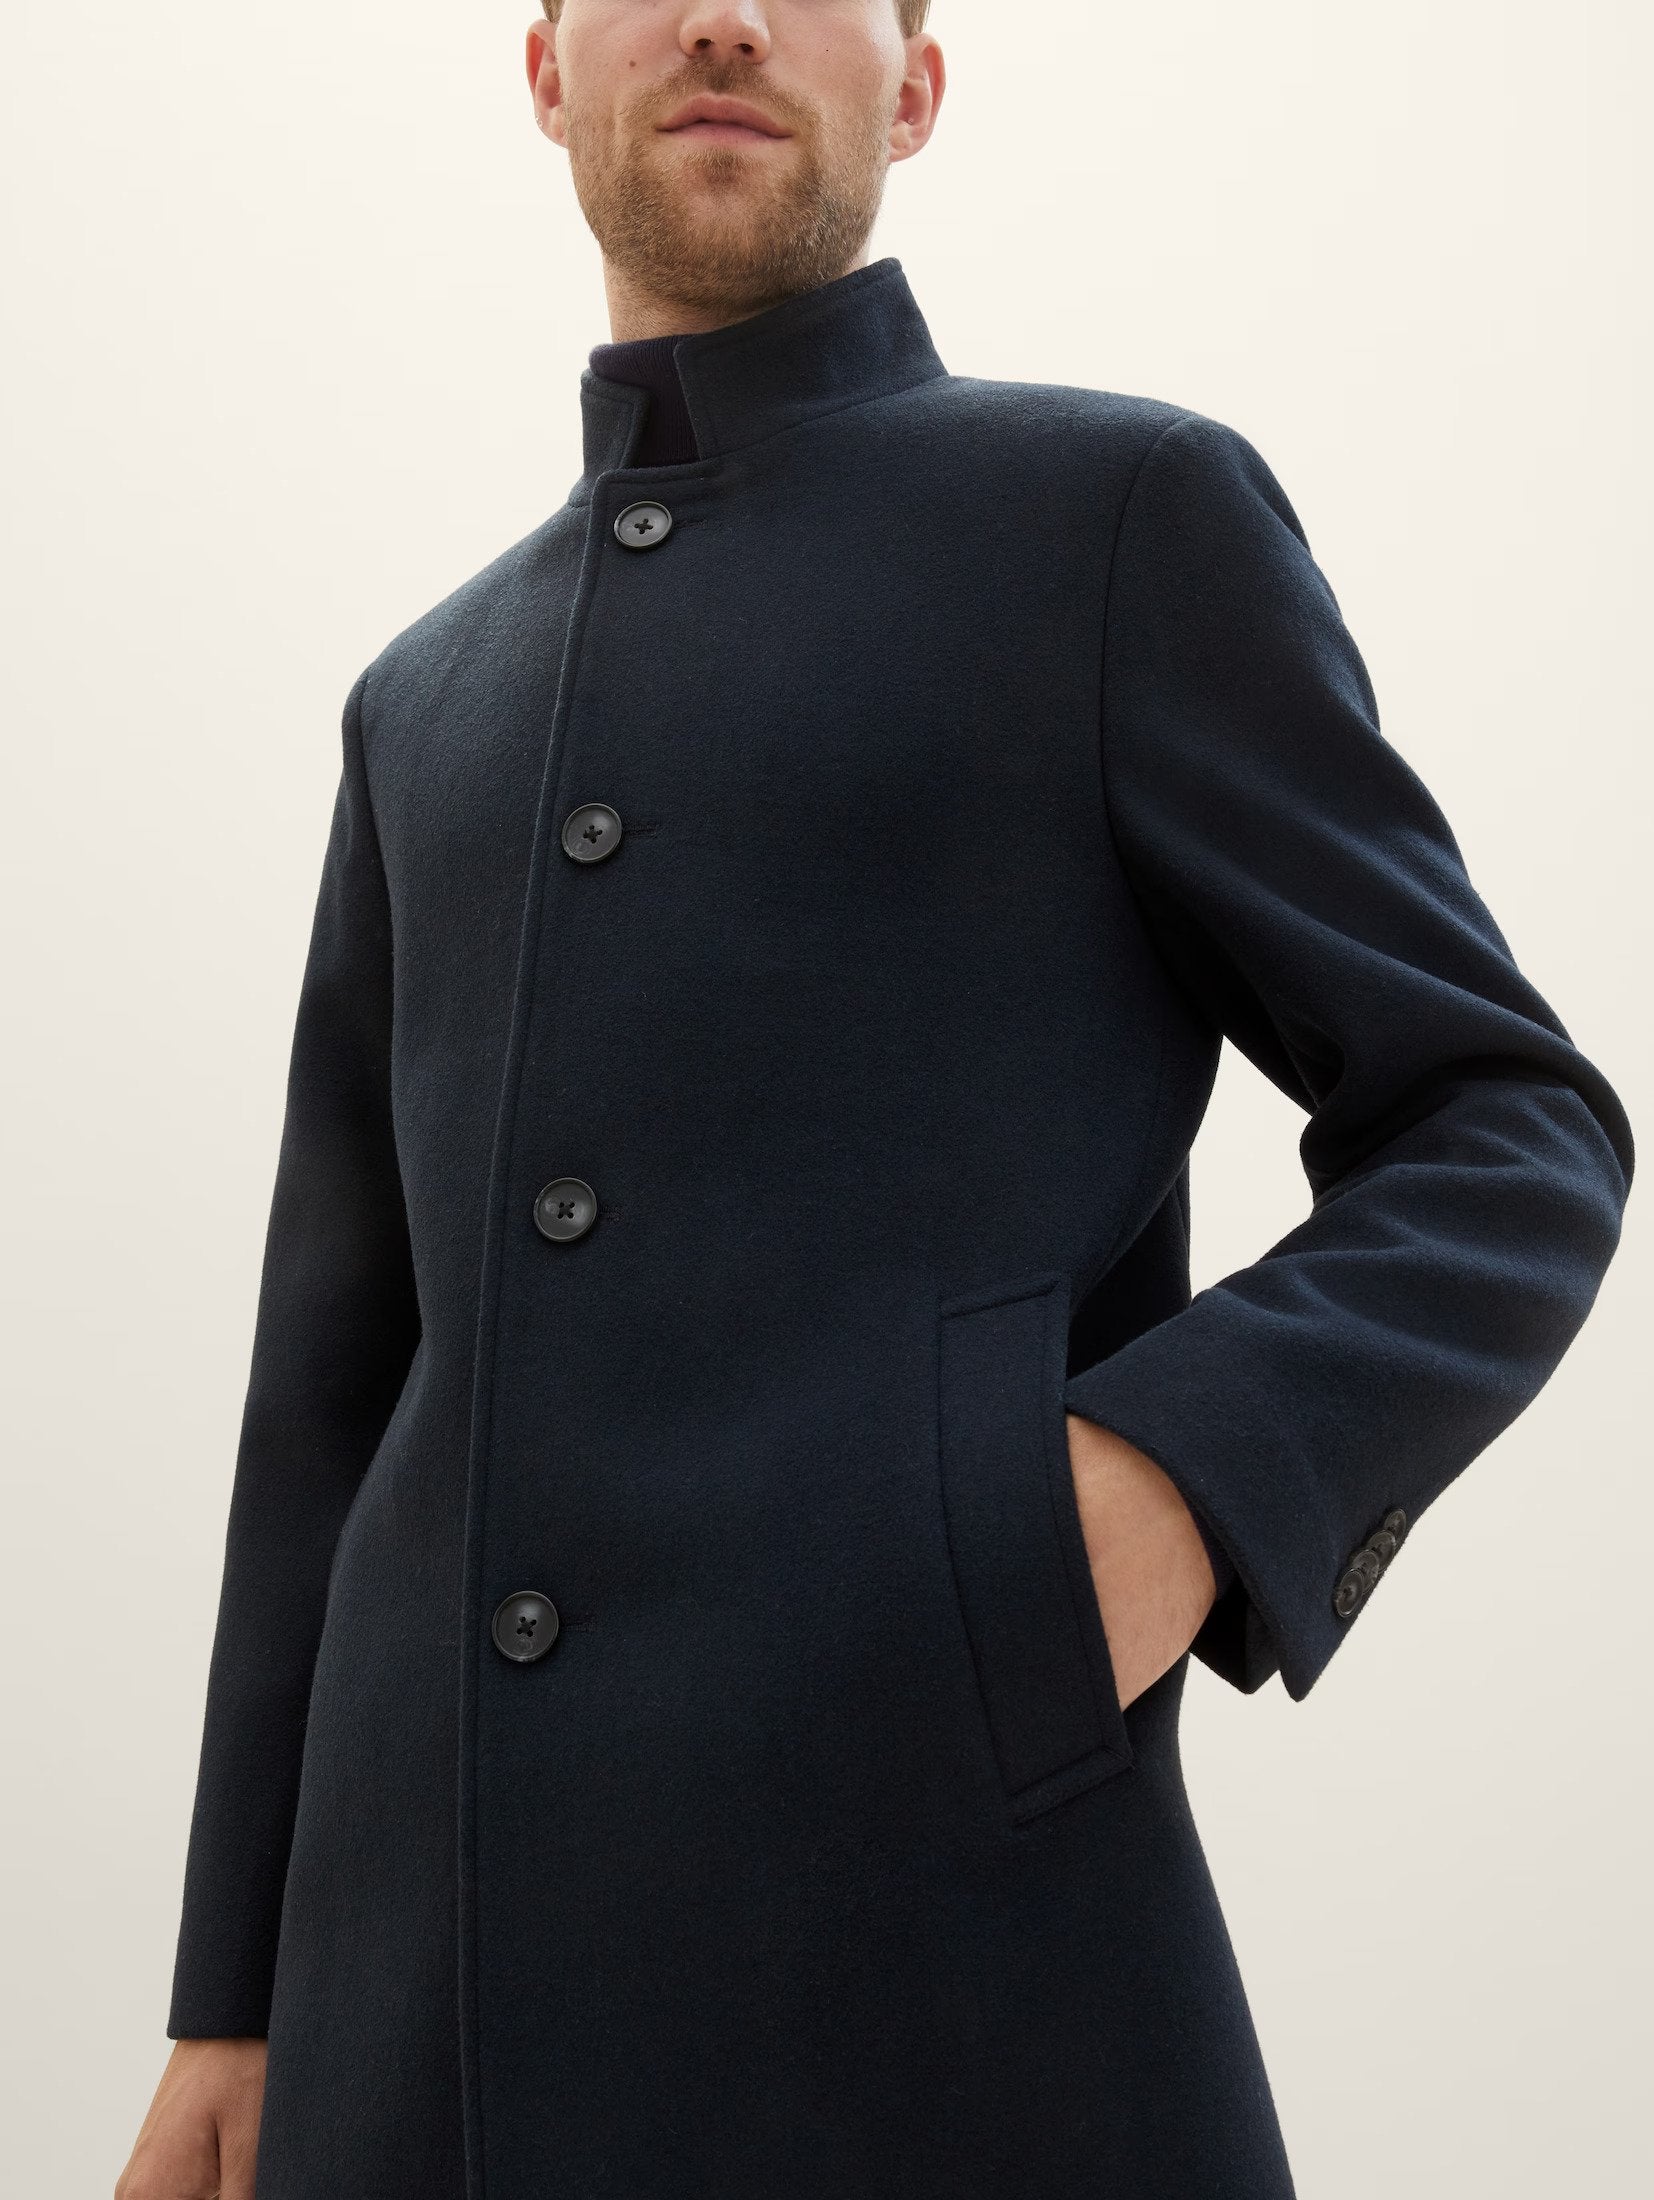 Tom Tailor Classy Occasional Navy Coat